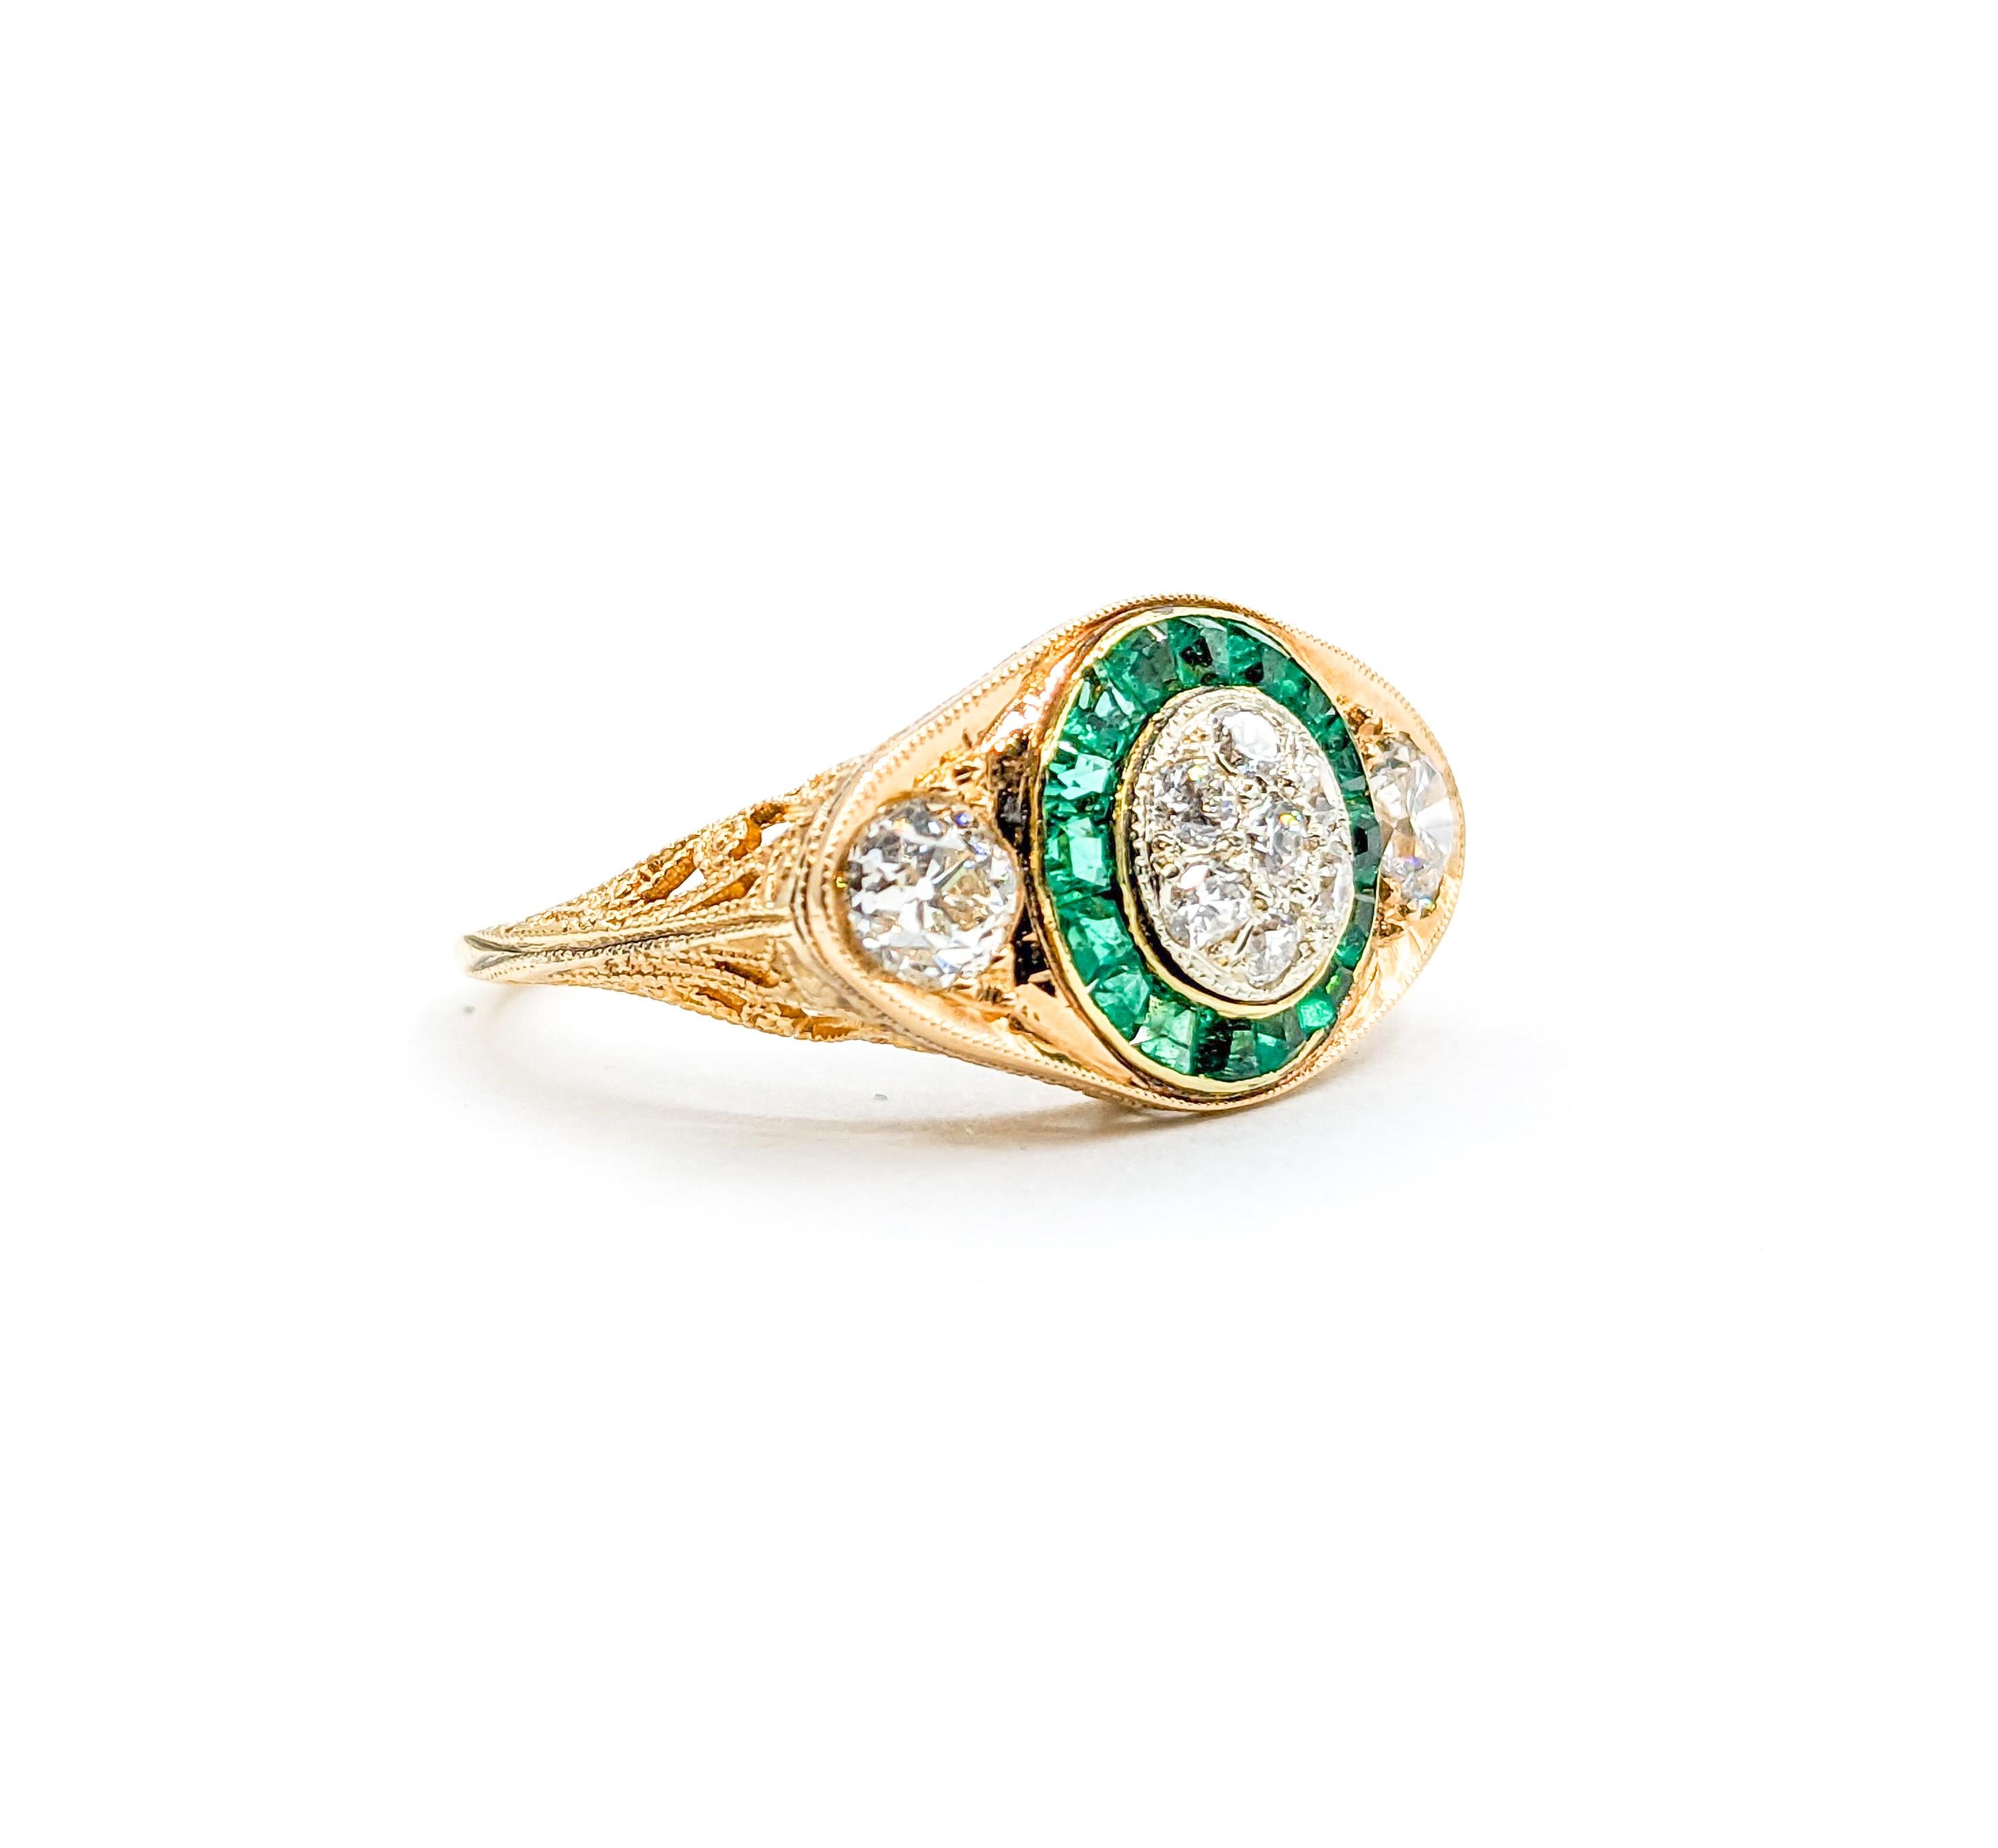 Antique Old European Diamond & Emeralds Target Ring in 14K Gold For Sale 1